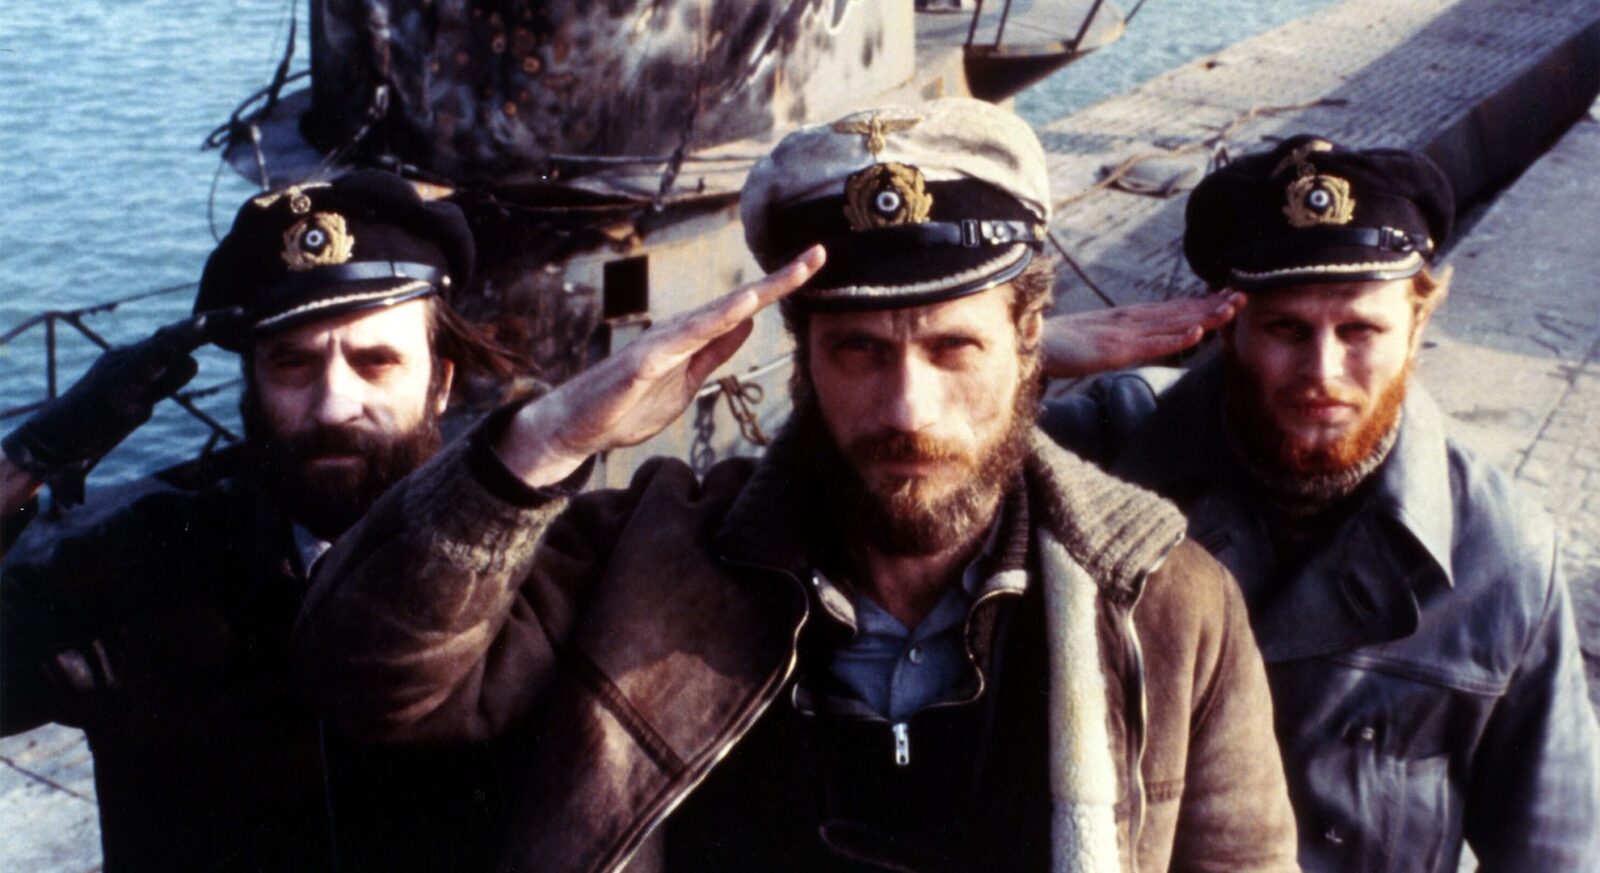 Image from the movie "Das Boot"